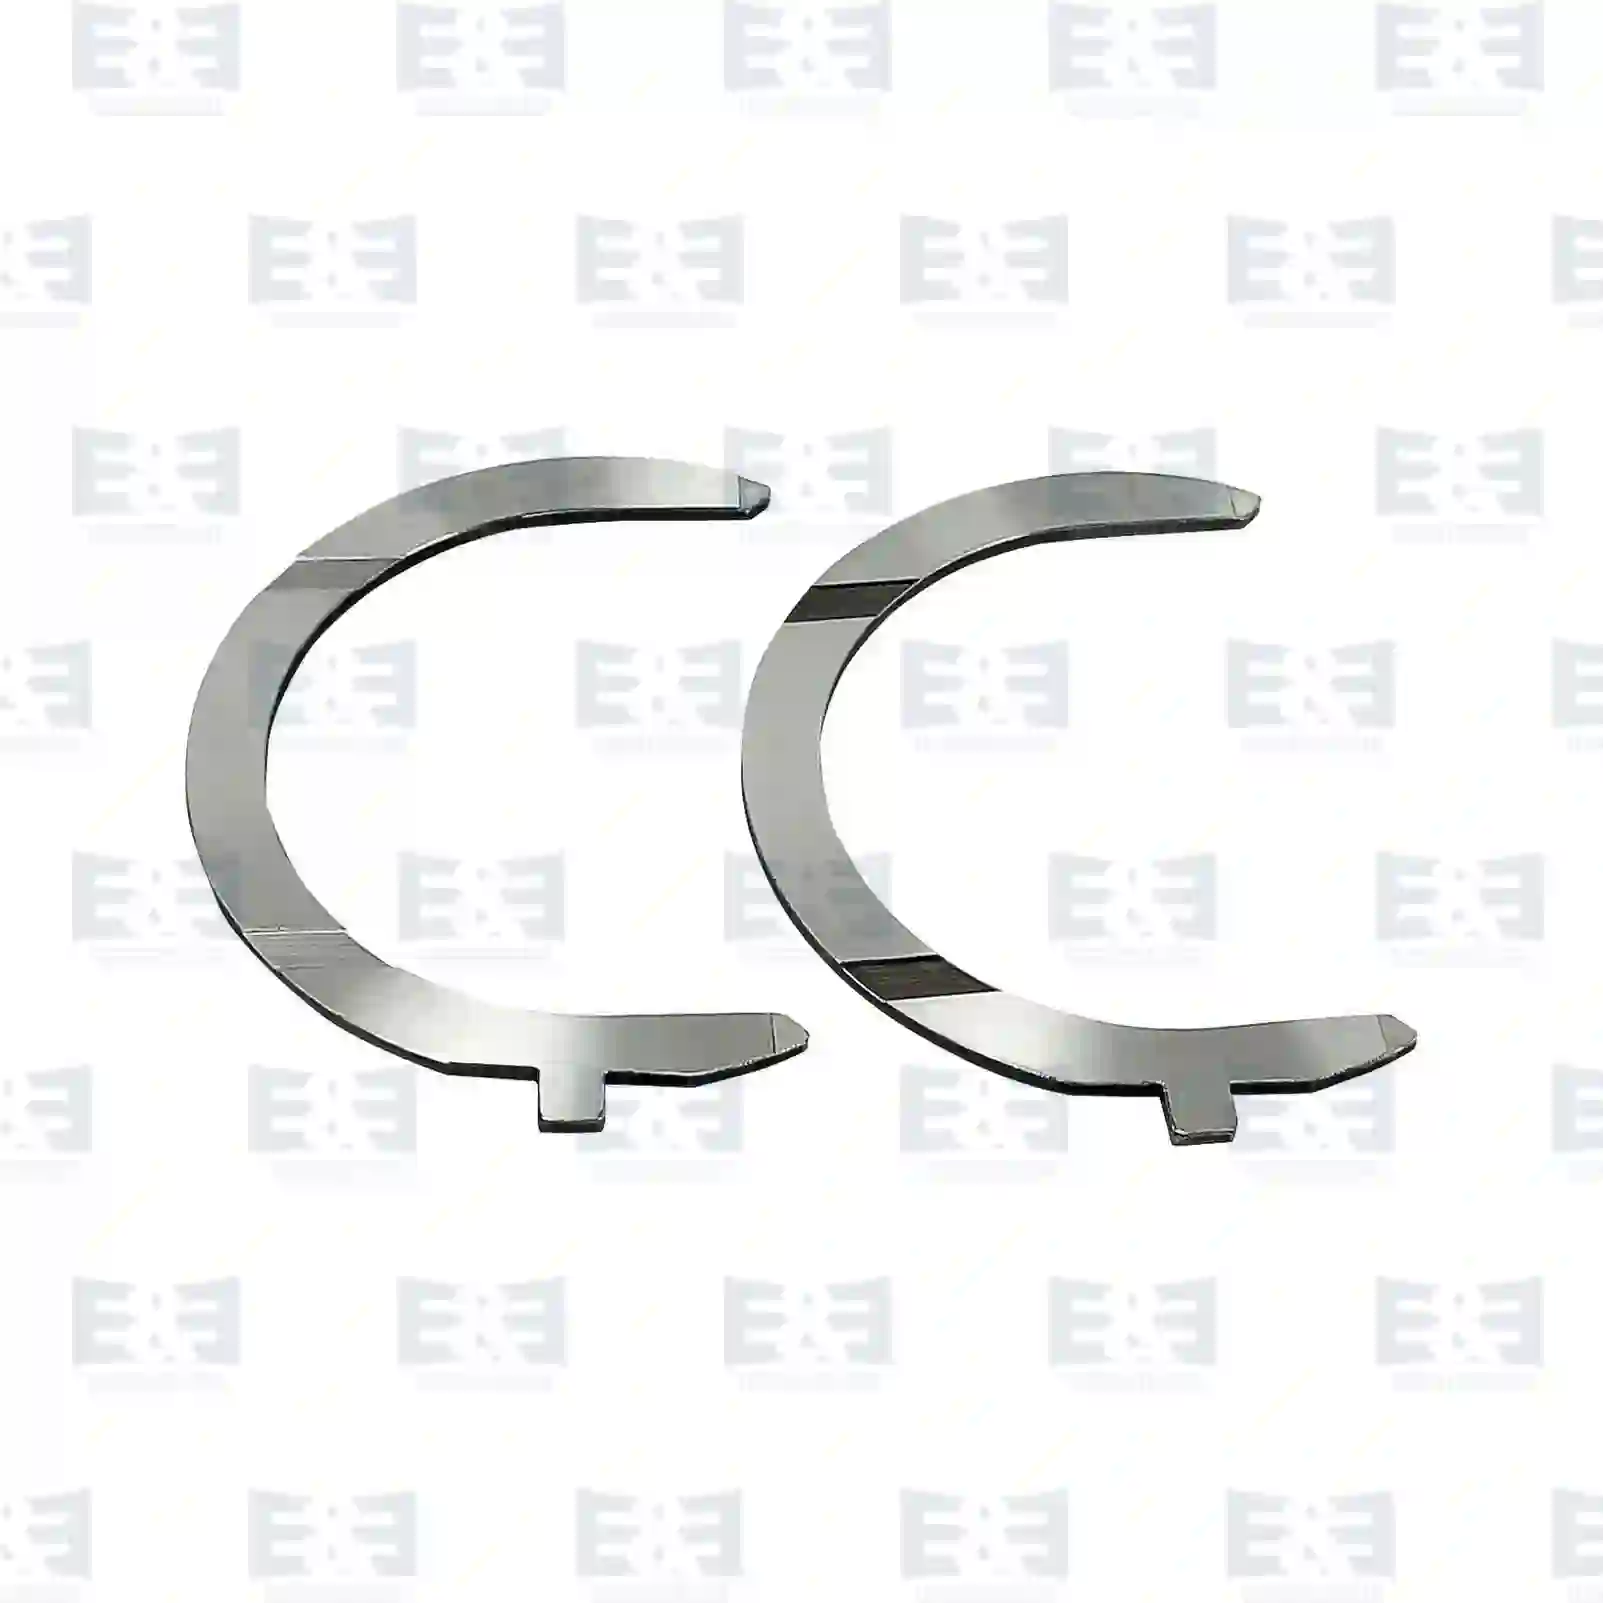  Thrust washer kit || E&E Truck Spare Parts | Truck Spare Parts, Auotomotive Spare Parts